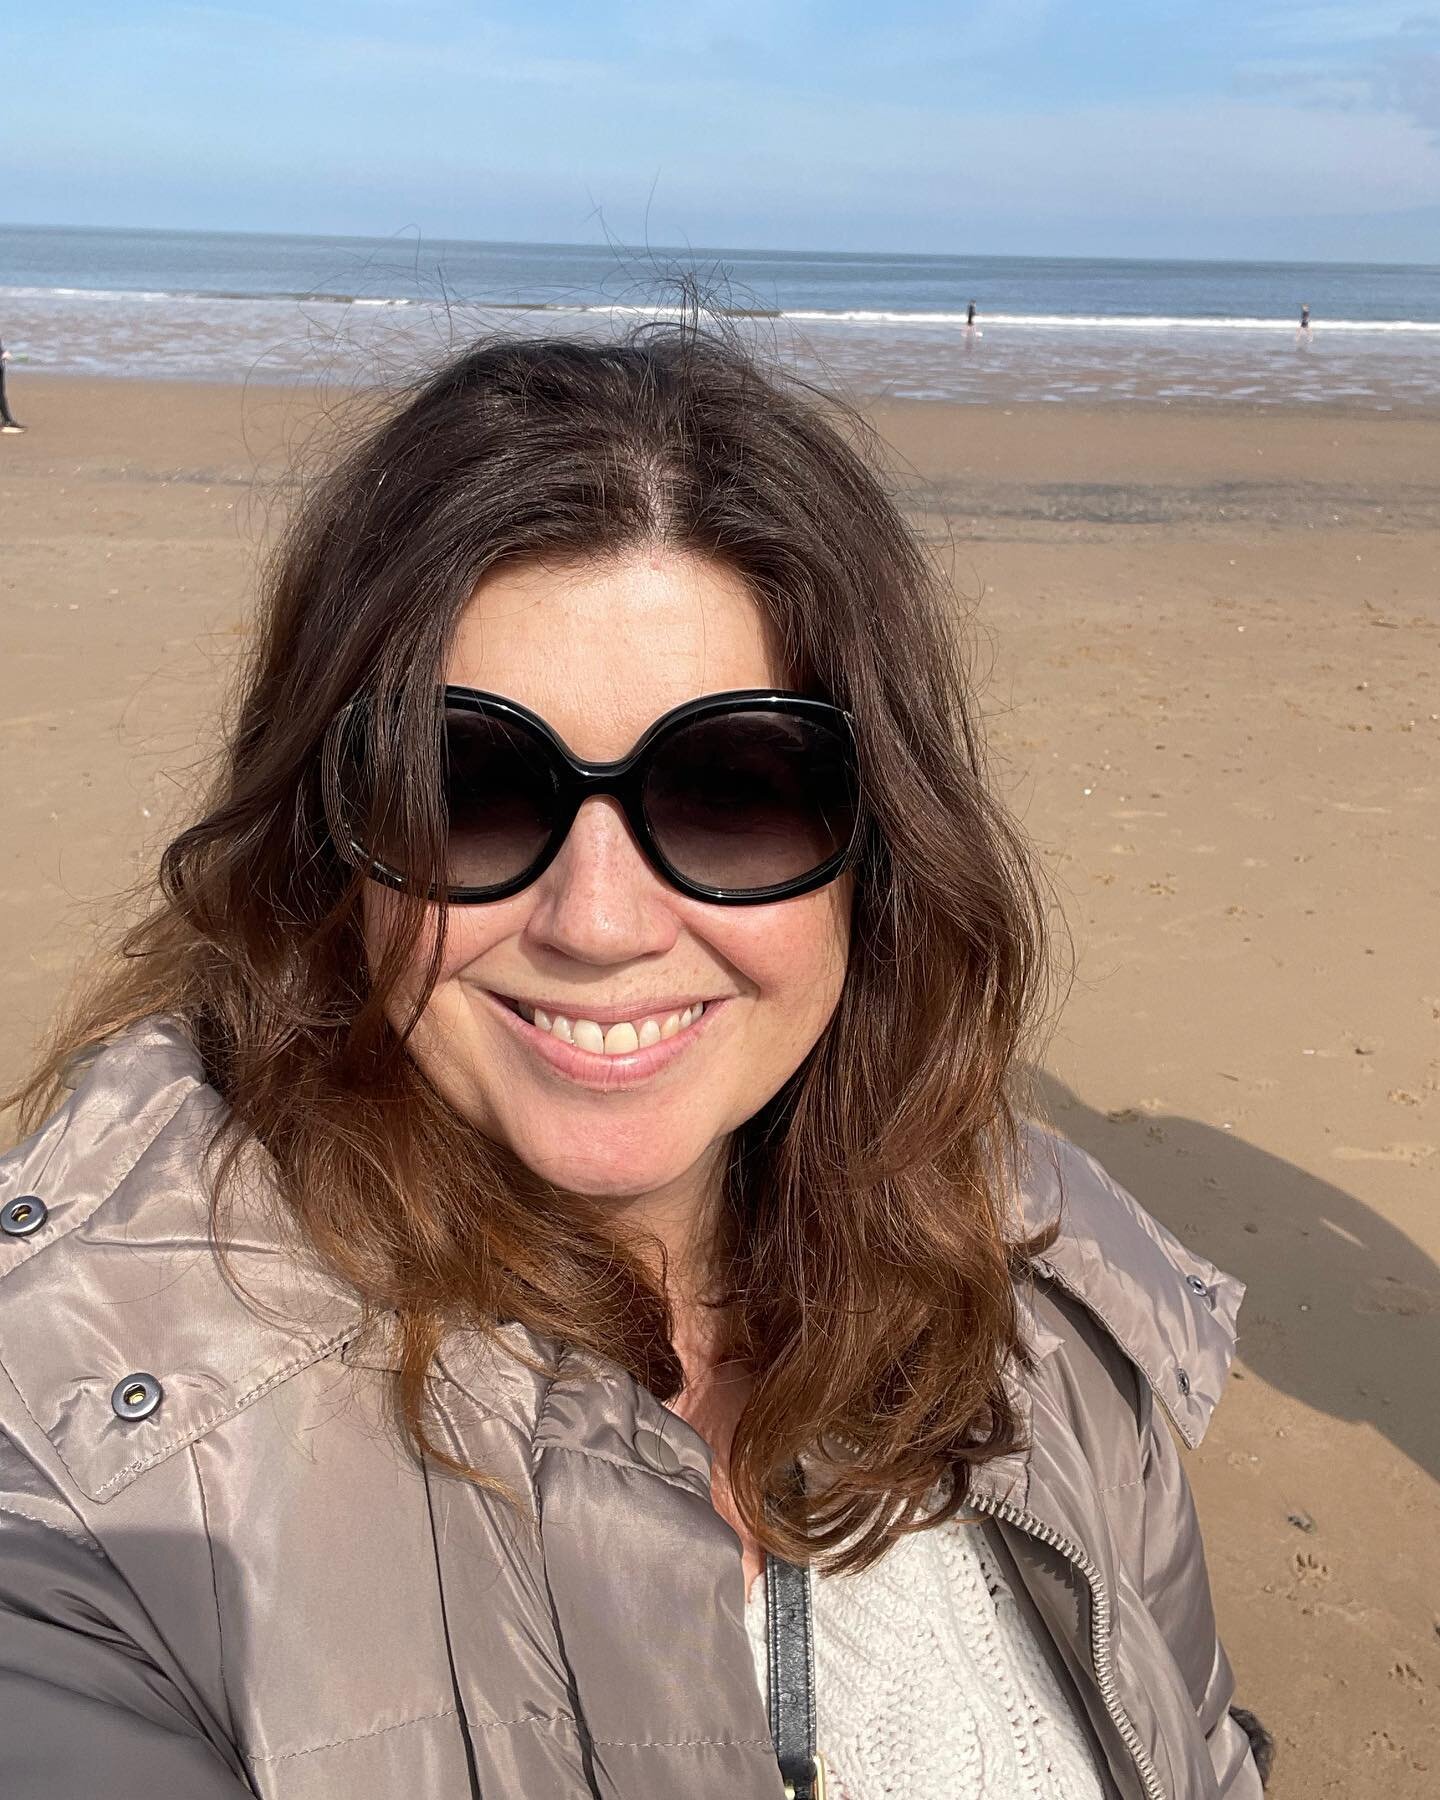 Bank holiday weekend ❤️ ☀️ 🐣 

I am on holiday on the North Norfolk coast - currently in full-on rest and relax mode - I am aware that my parasympathetic nervous system is activated. 

I&rsquo;m reading, walking, sleeping, eating&hellip;I&rsquo;m so